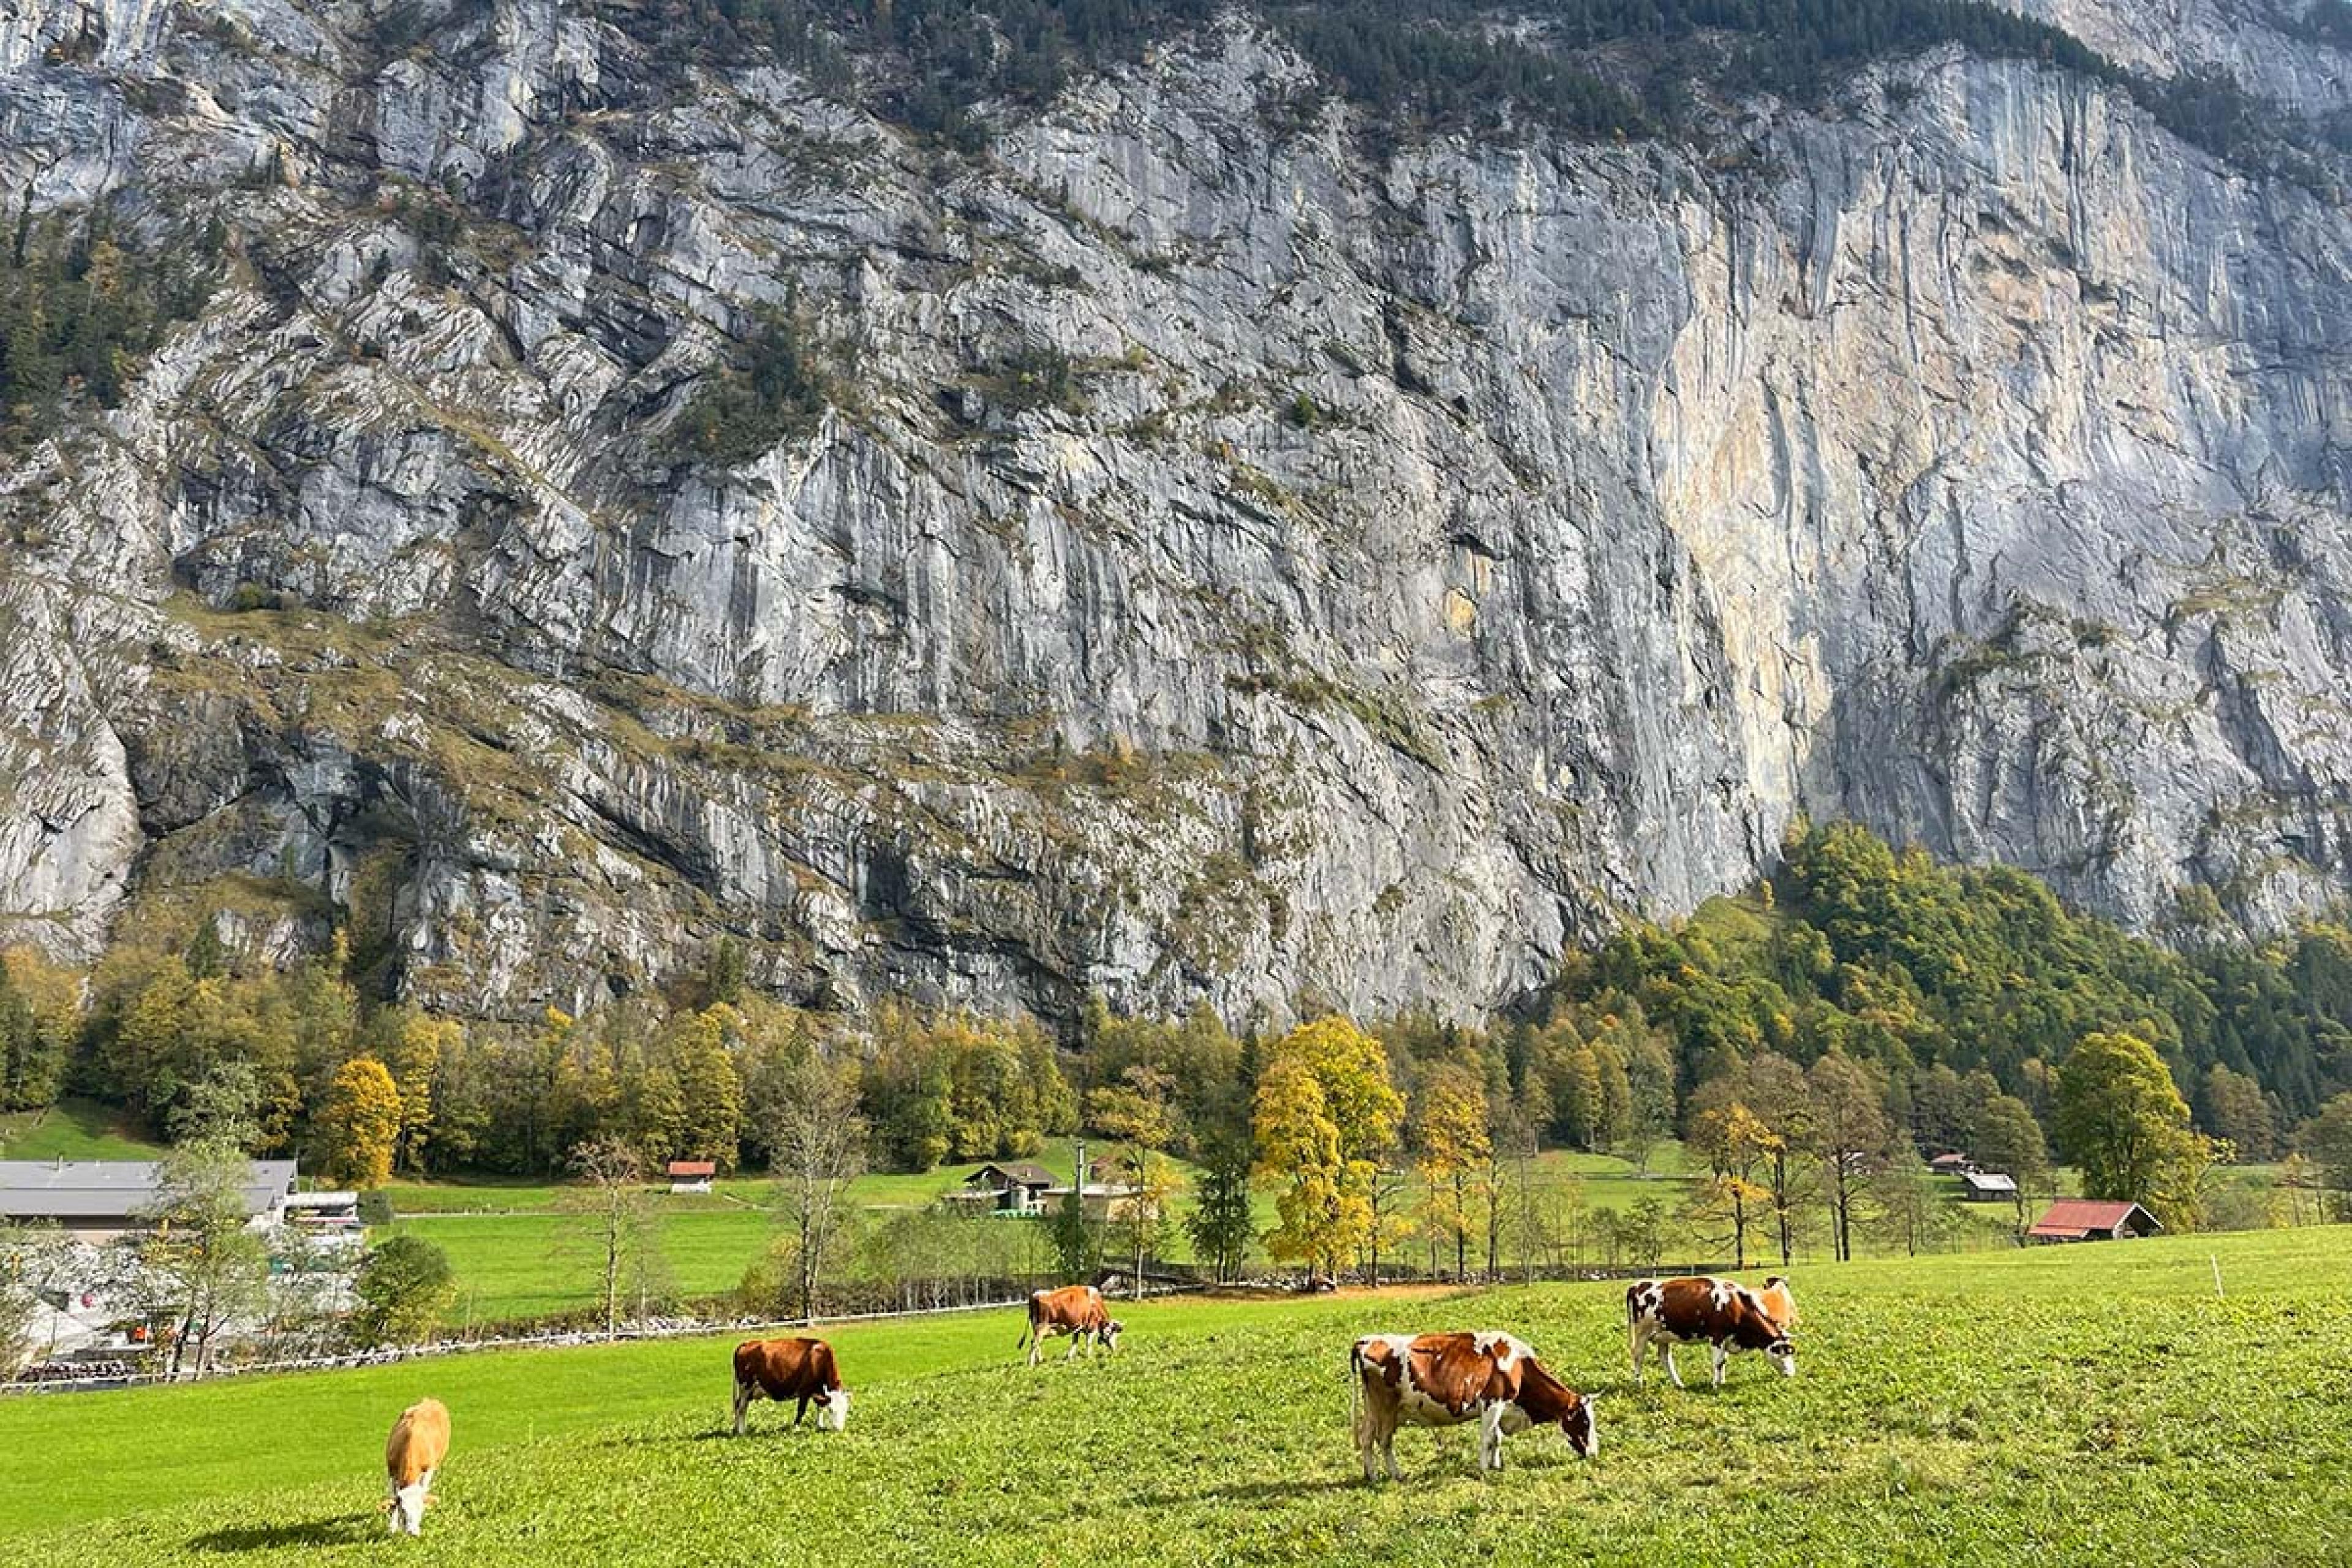 cows grazing with a sheer rock wall behind it